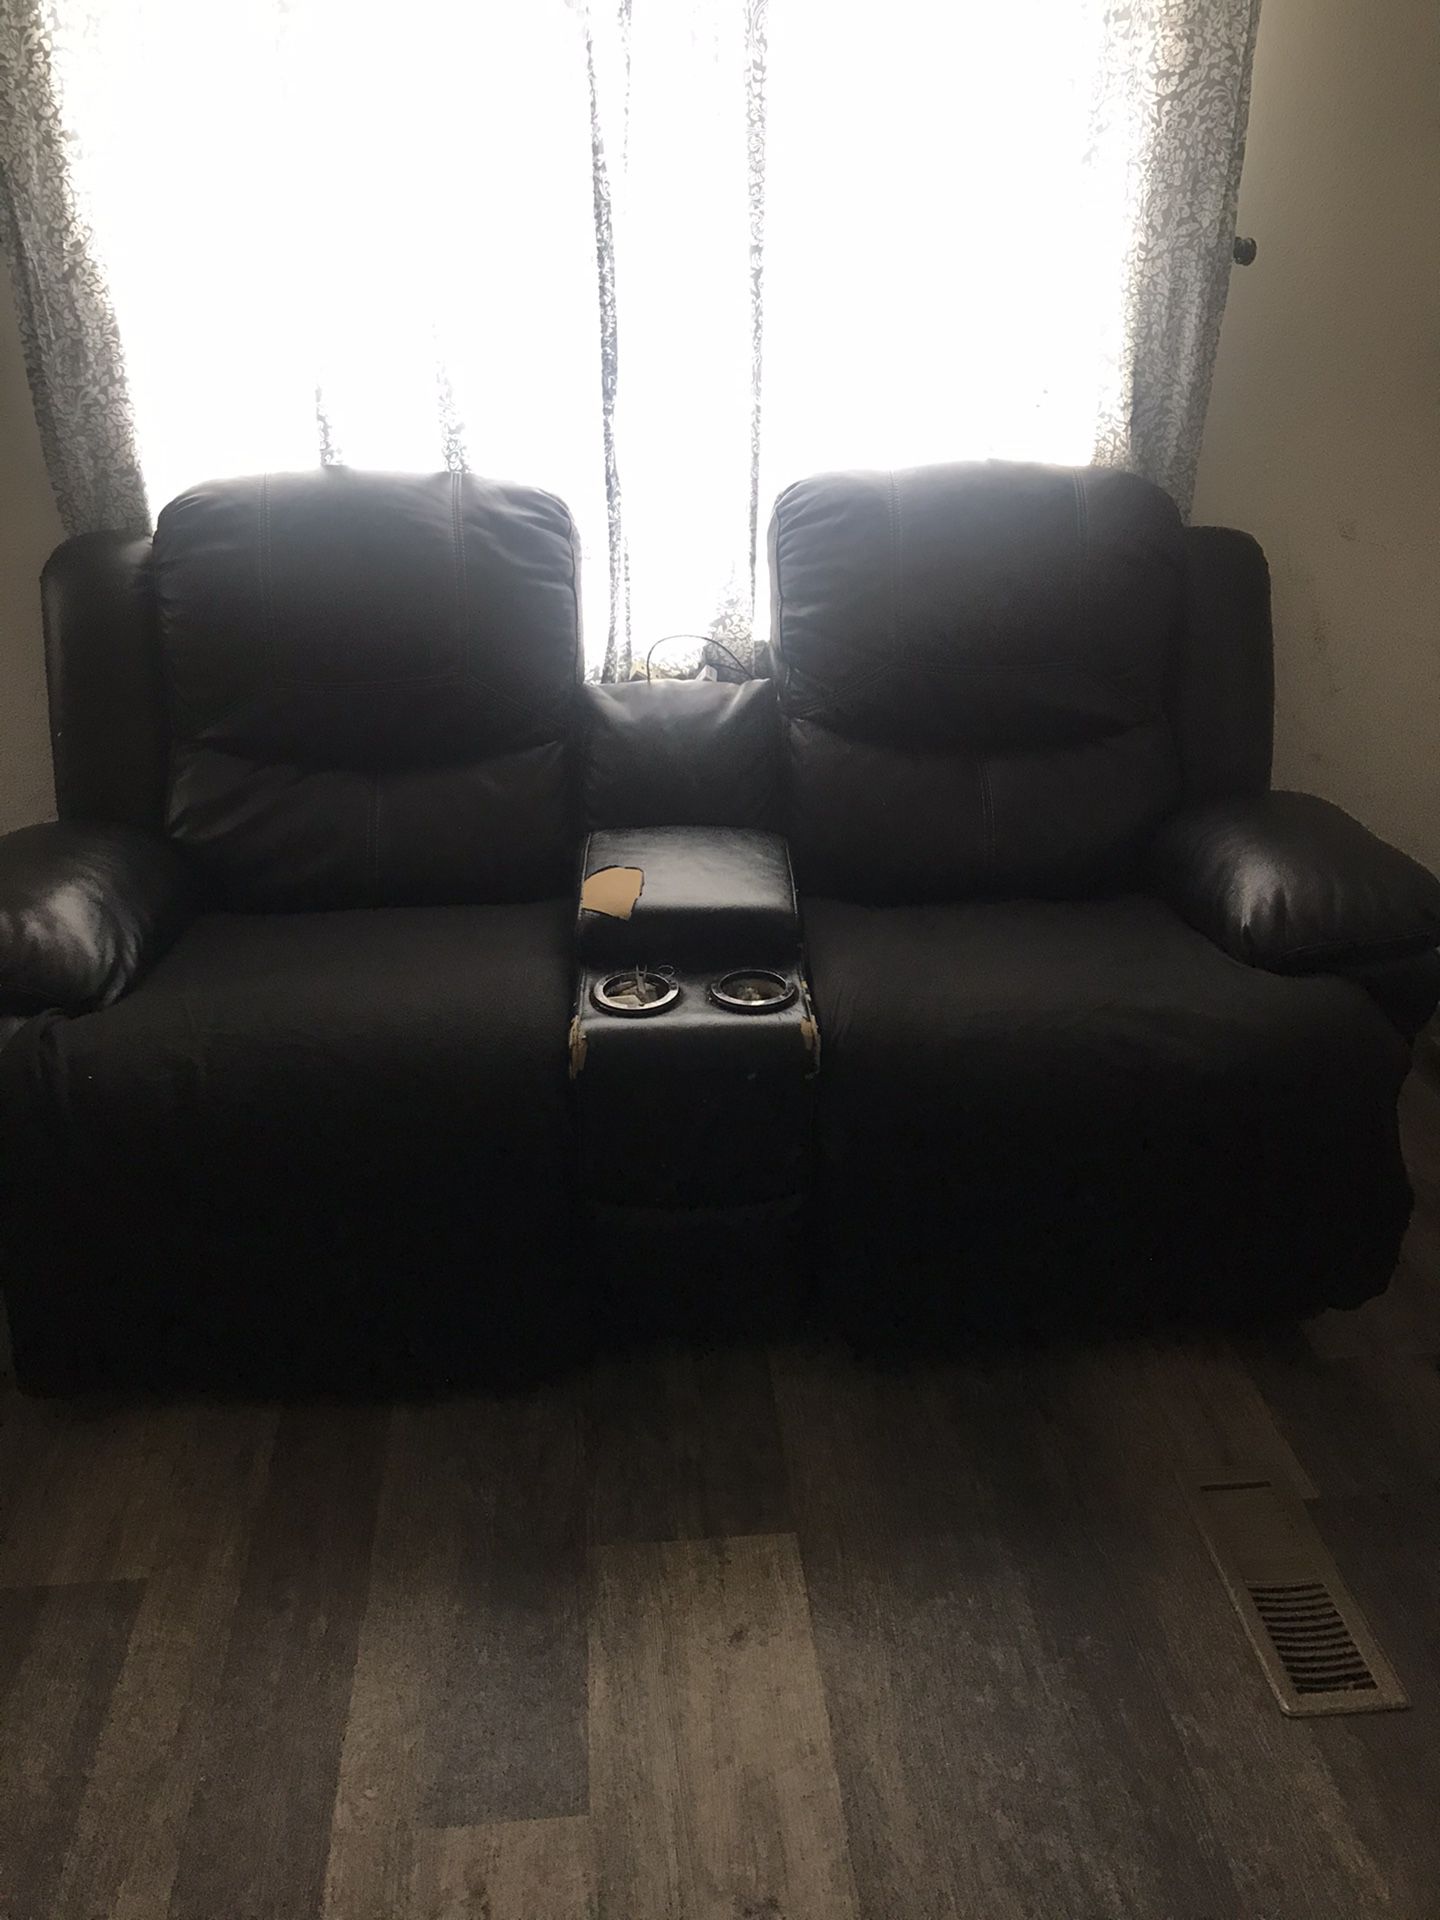 2 PIECE RECLINEABLE SOFA SET !!!FREEE!!